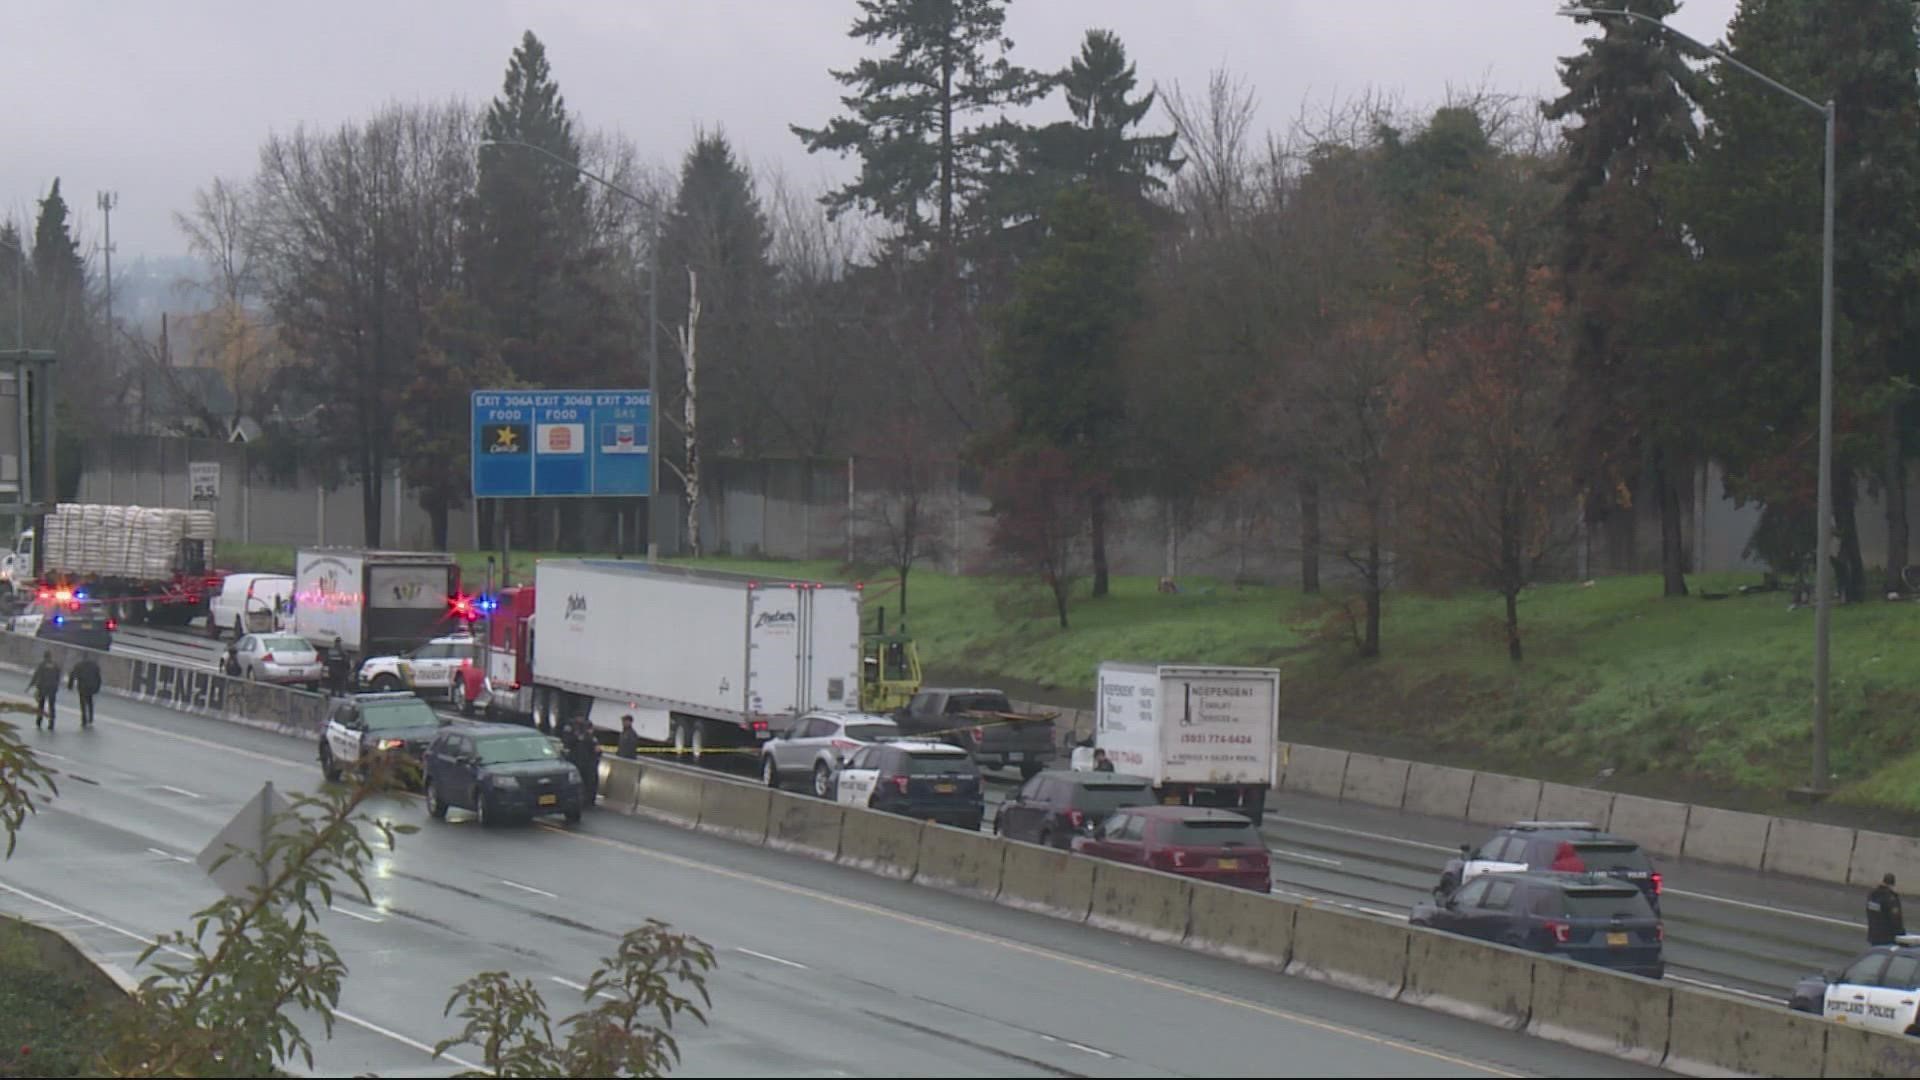 A Portland police officer shot and killed a man after a crime spree in the city that ended on Interstate 5. KGW's Pat Dooris has more on the events from that day.